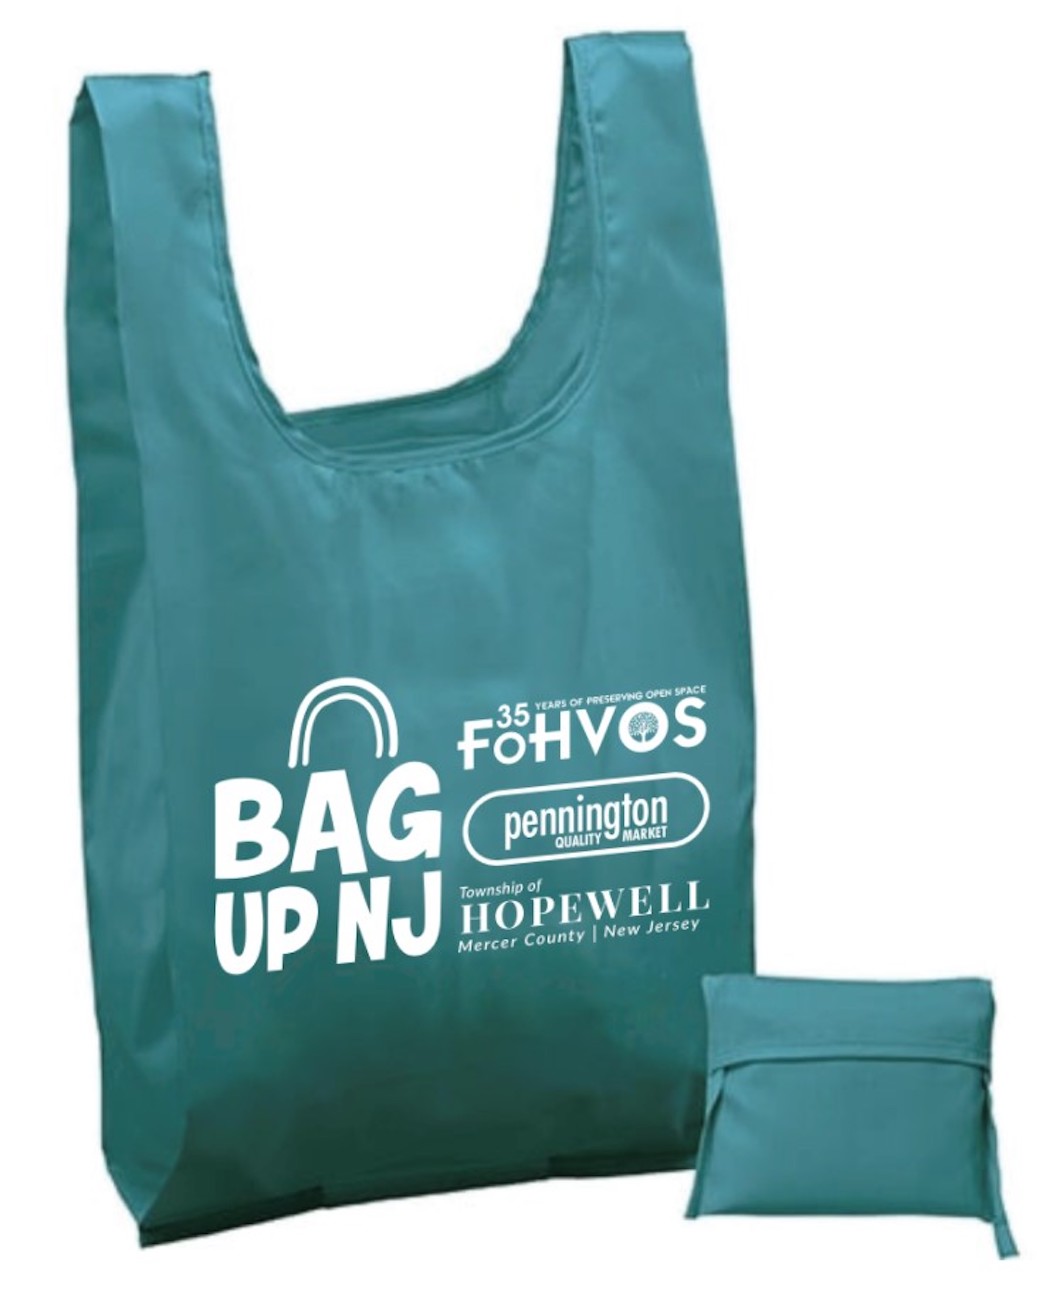 Will the plastic bag ban in N.J. help the environment? Here's what